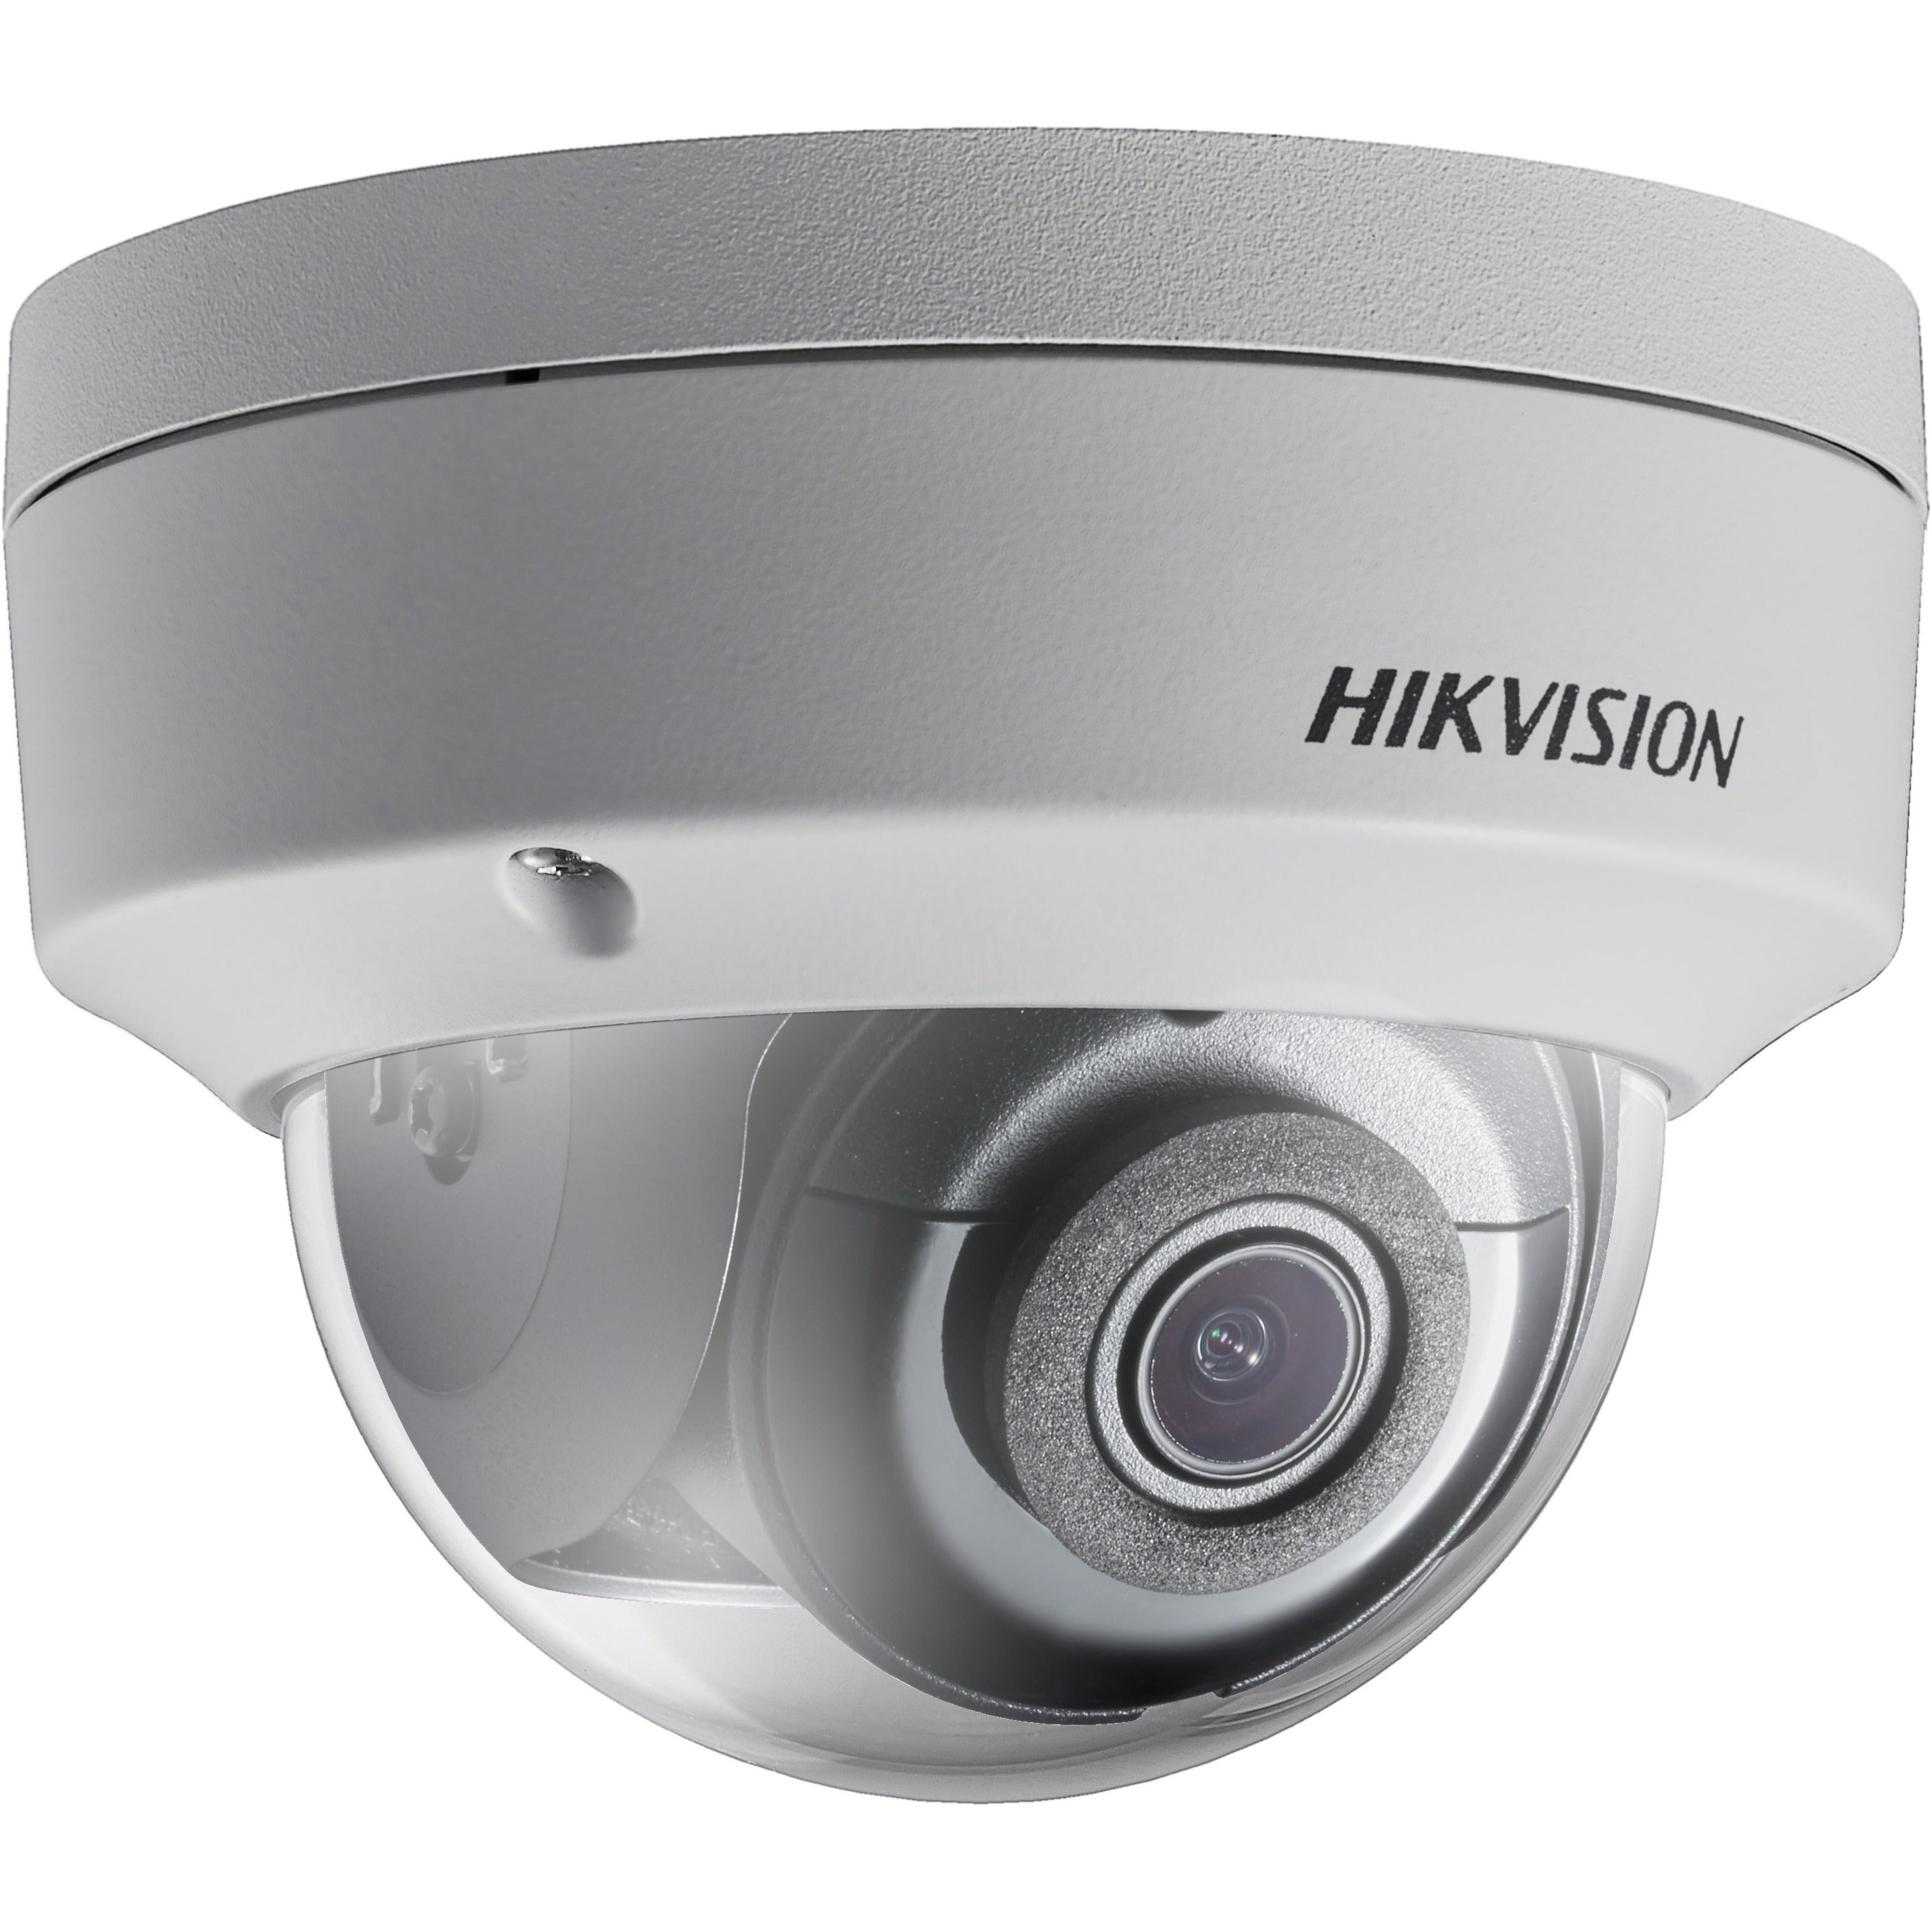 Hikvision DS-2CD2123G0-I 2.8MM EasyIP 2.0plus 2 MP Outdoor IR Fixed Dome Camera, Full HD, Infrared Night Vision